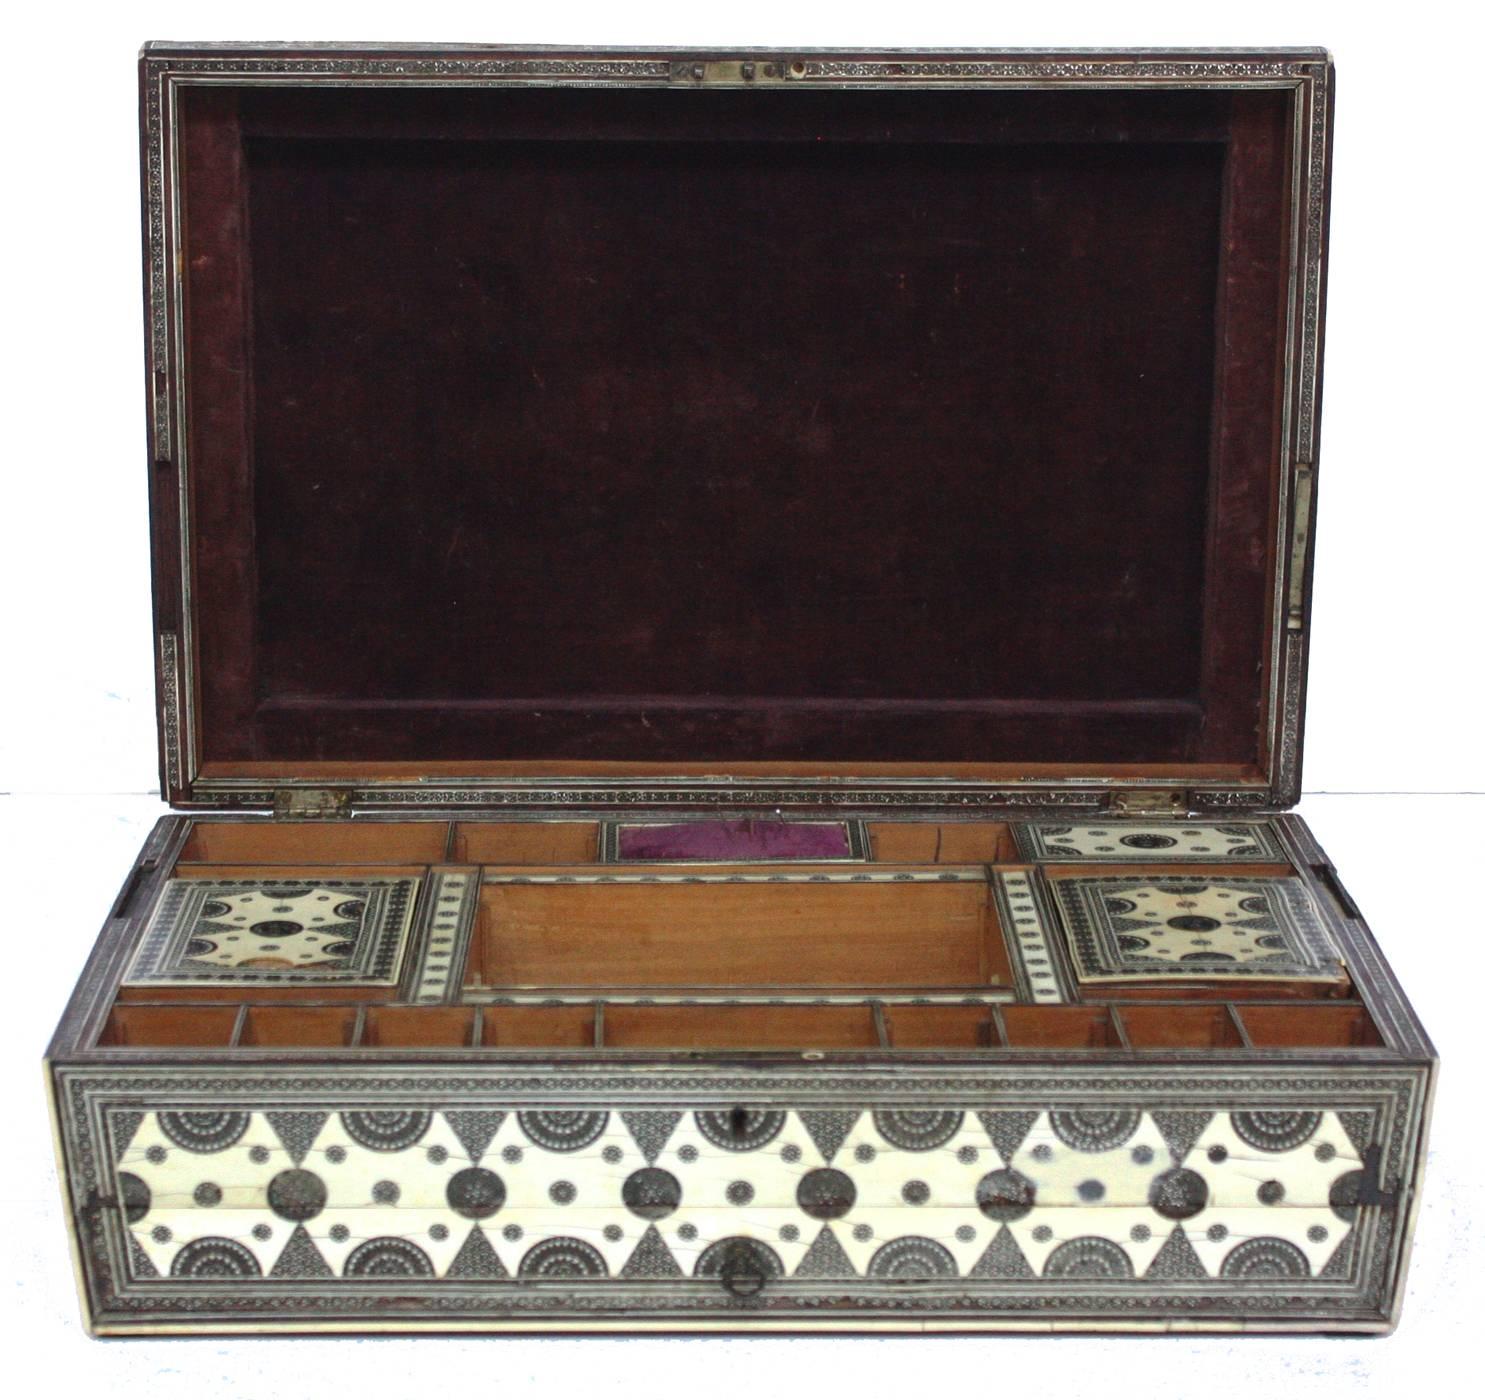 Islamic Large Syrian Inlaid Bone and Mother-of-pearl Work Box